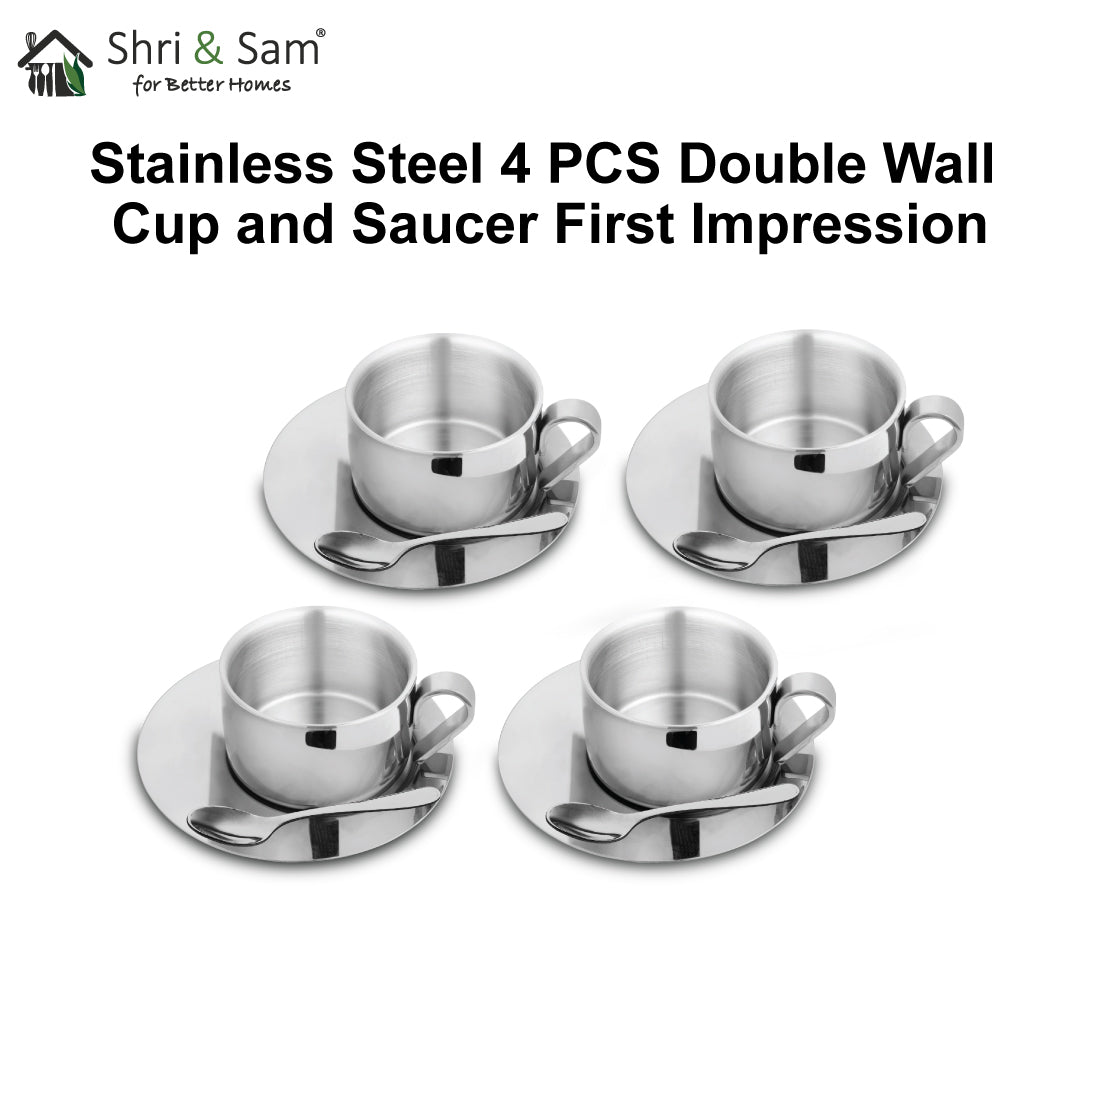 Stainless Steel 4 PCS Double Wall Cup and Saucer First Impression